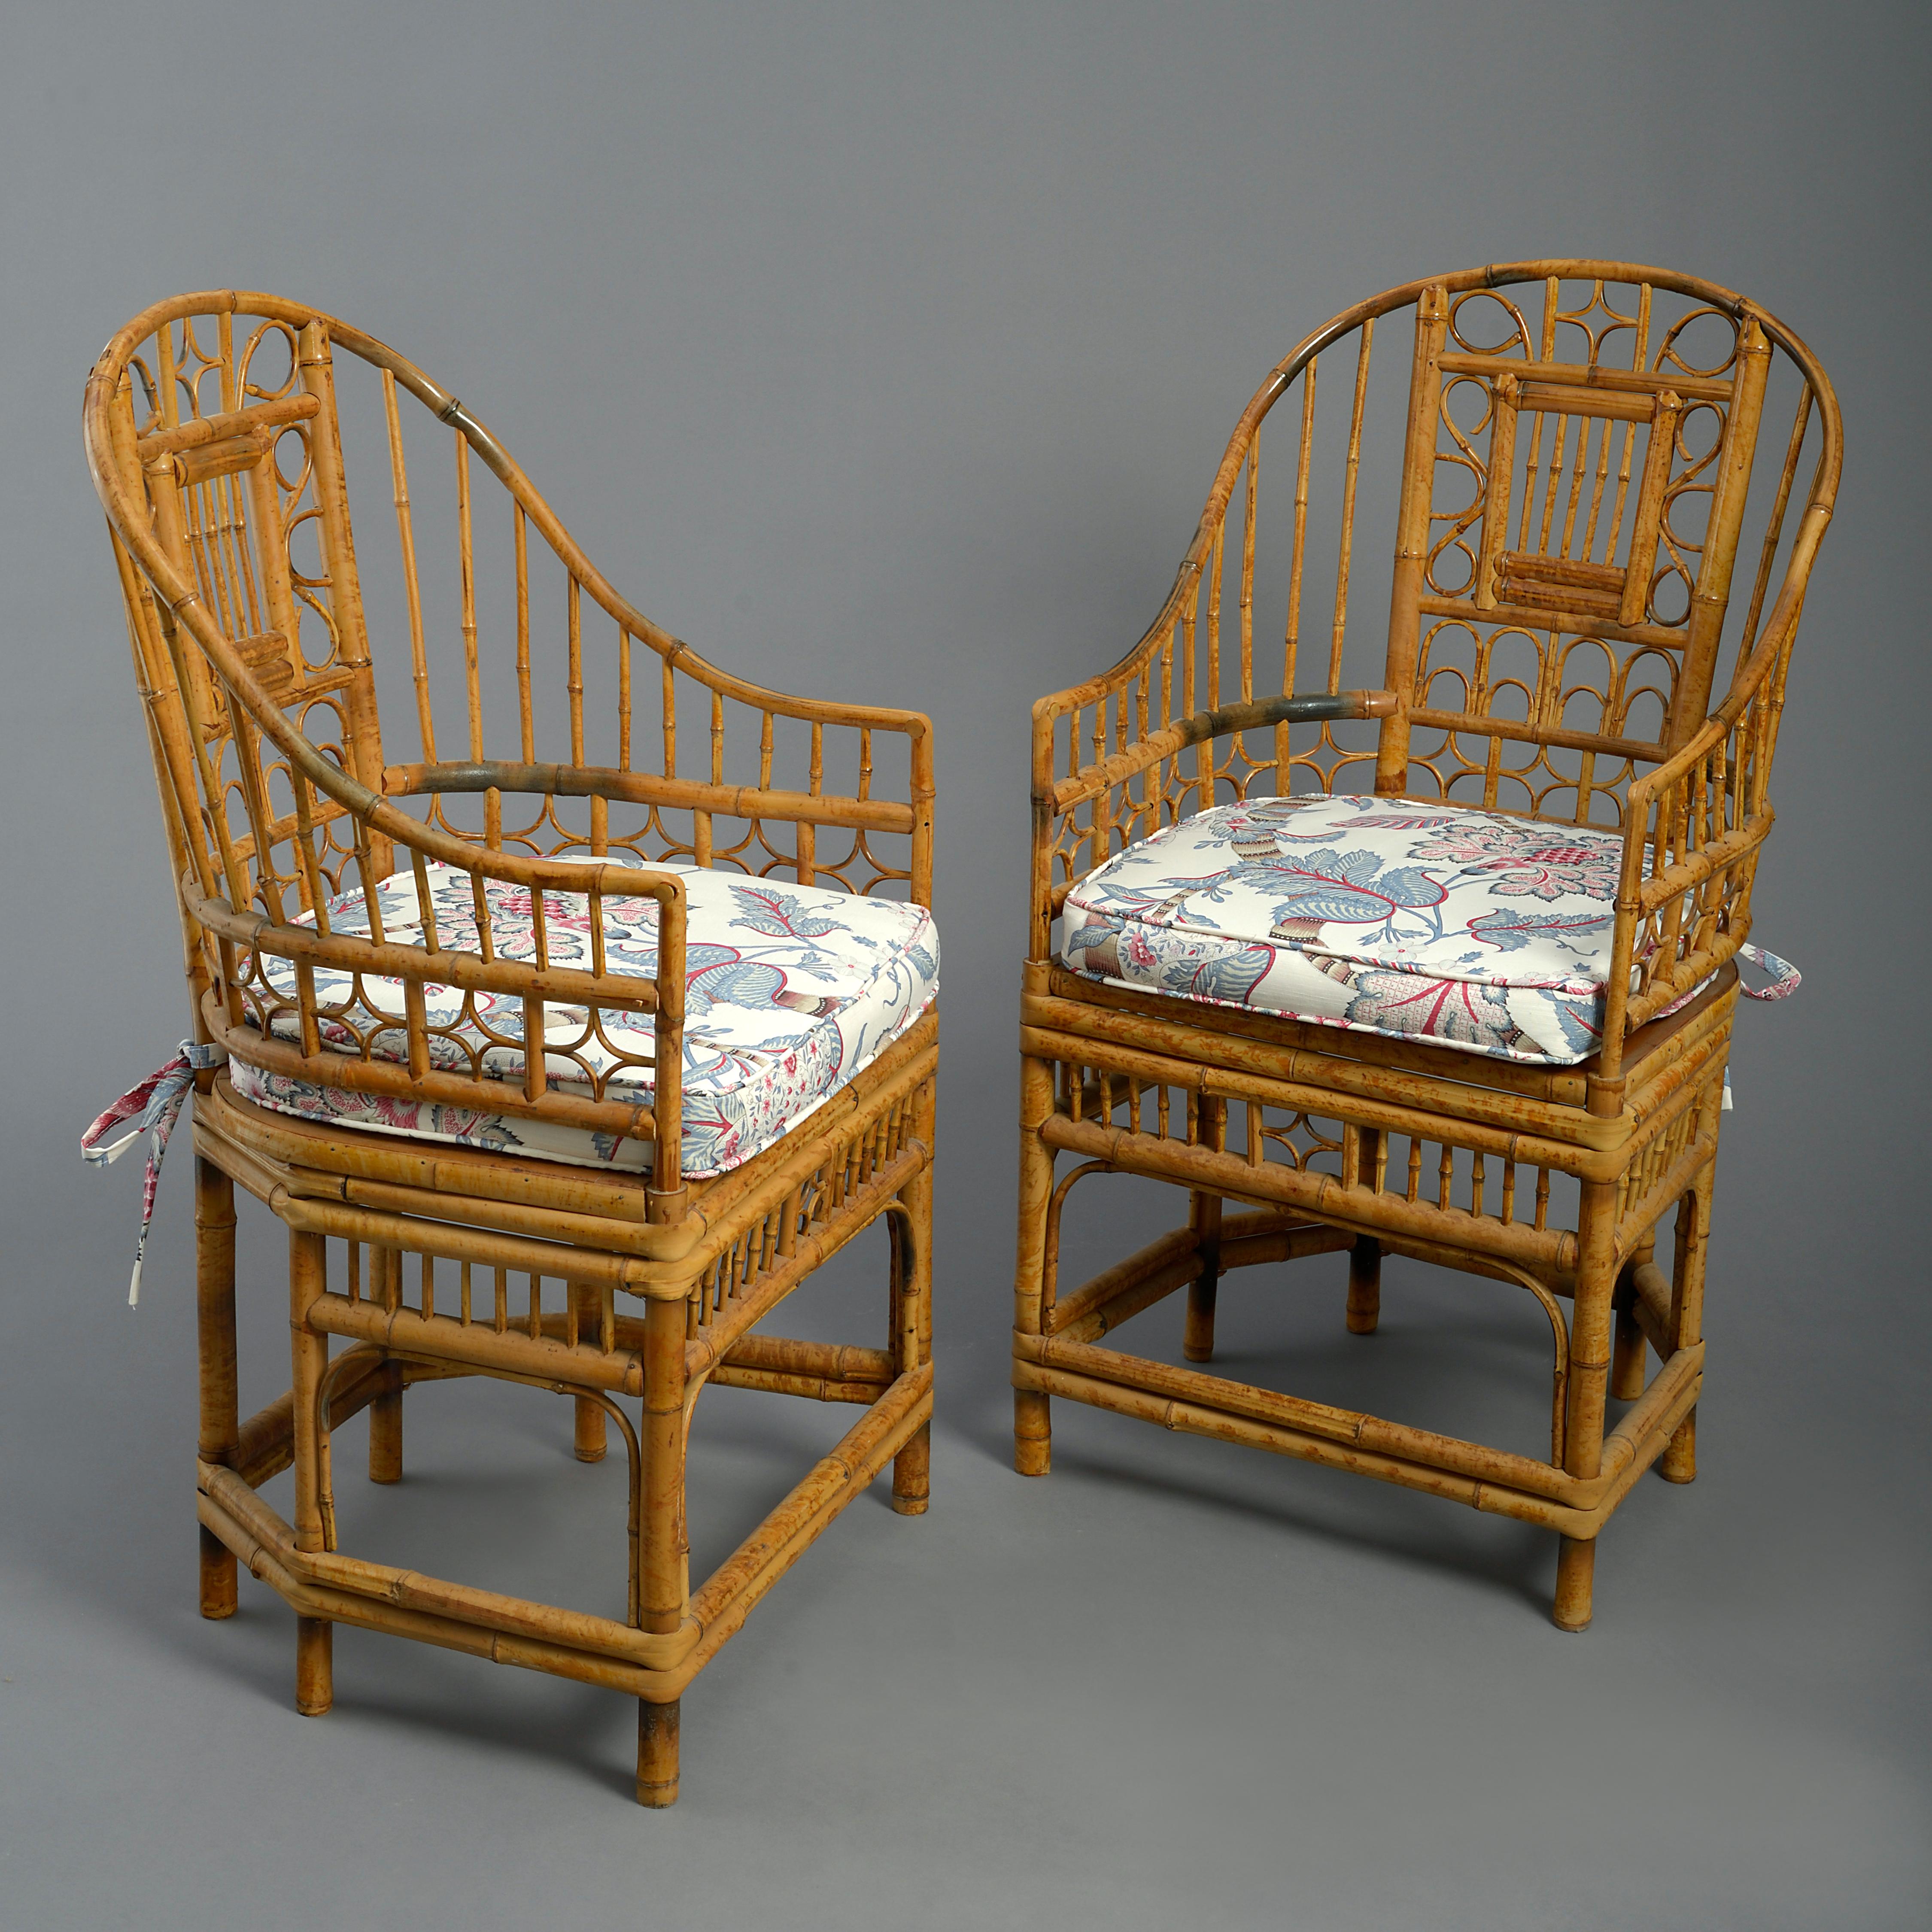 A set of four mid-twentieth century bamboo armchairs, the horseshoe backs with intricate scrollwork decoration, raised upon legs with conjoining stretchers. Together with squab cushion seats.

These chairs show stylistic influence of the suites of